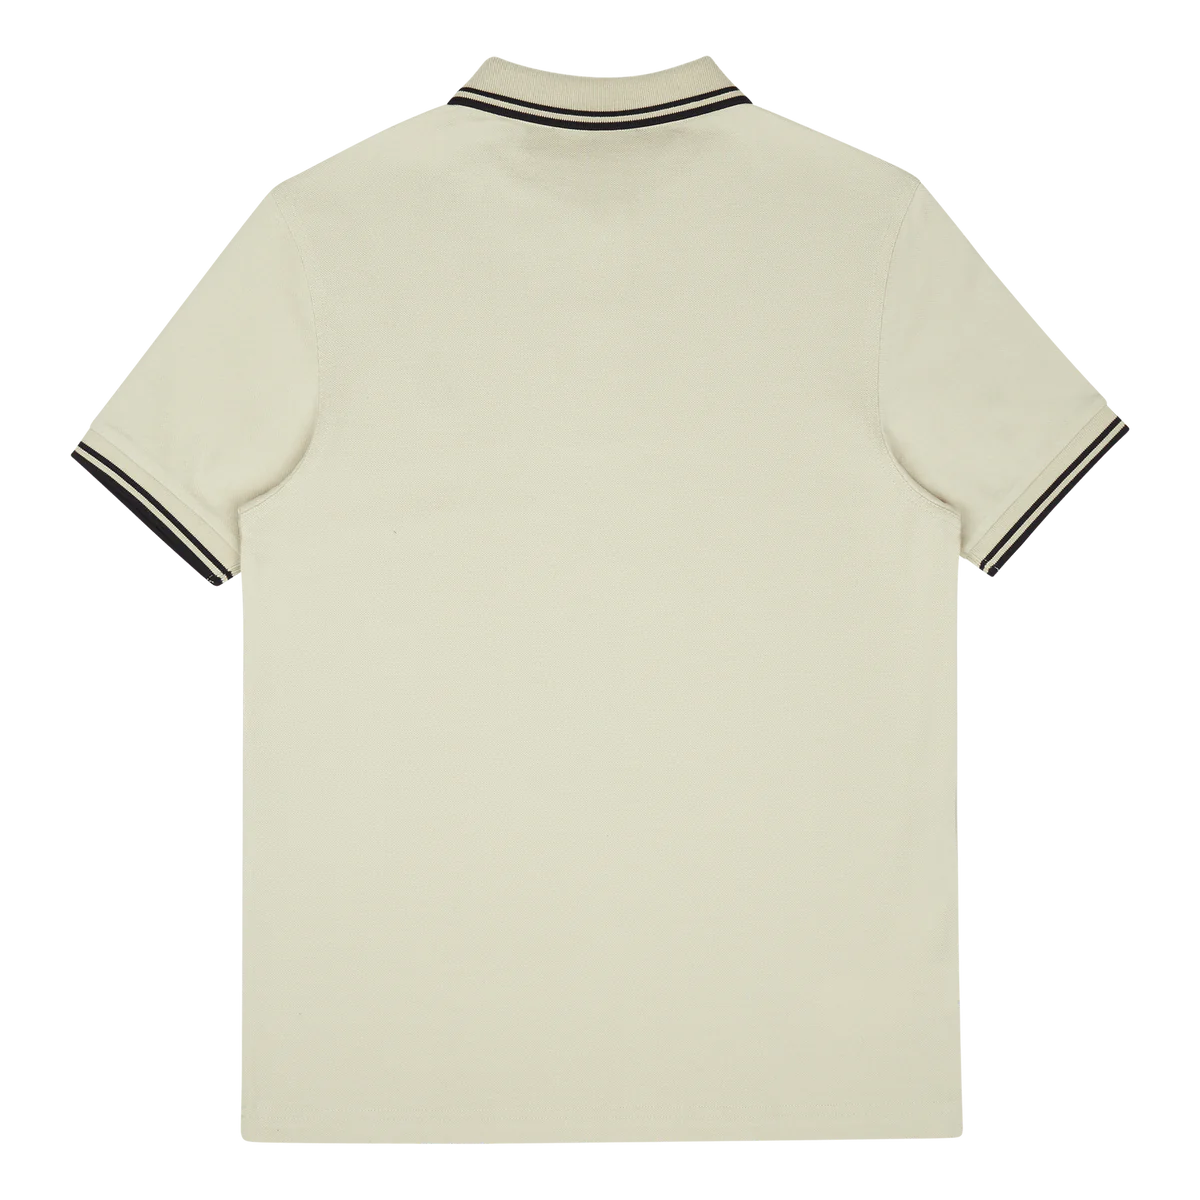 Fred Perry Ανδρική μπλούζα Polo Twin Tipped Fred Perry Shirt M3600 R70 Μπεζ